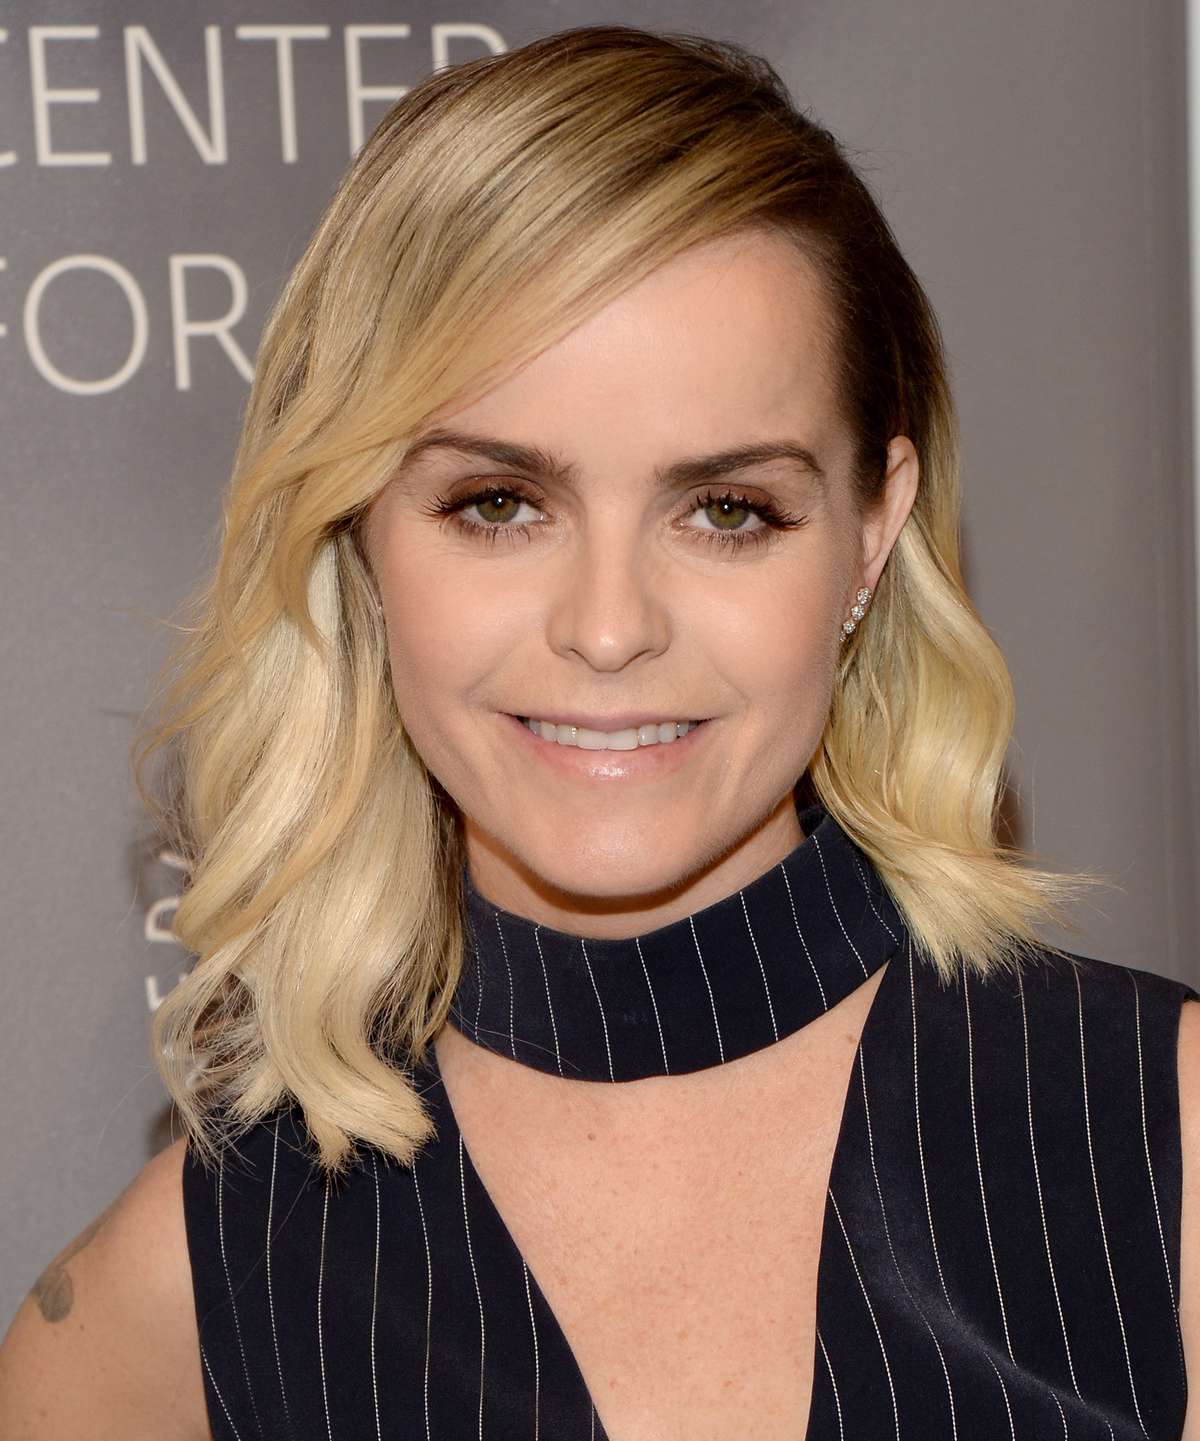 Actress Taryn Manning attends The Paley Center For Media Presents An Evening With 'Orange Is the New Black' at The Paley Center for Media on May 26, 2016 in Beverly Hills, California.